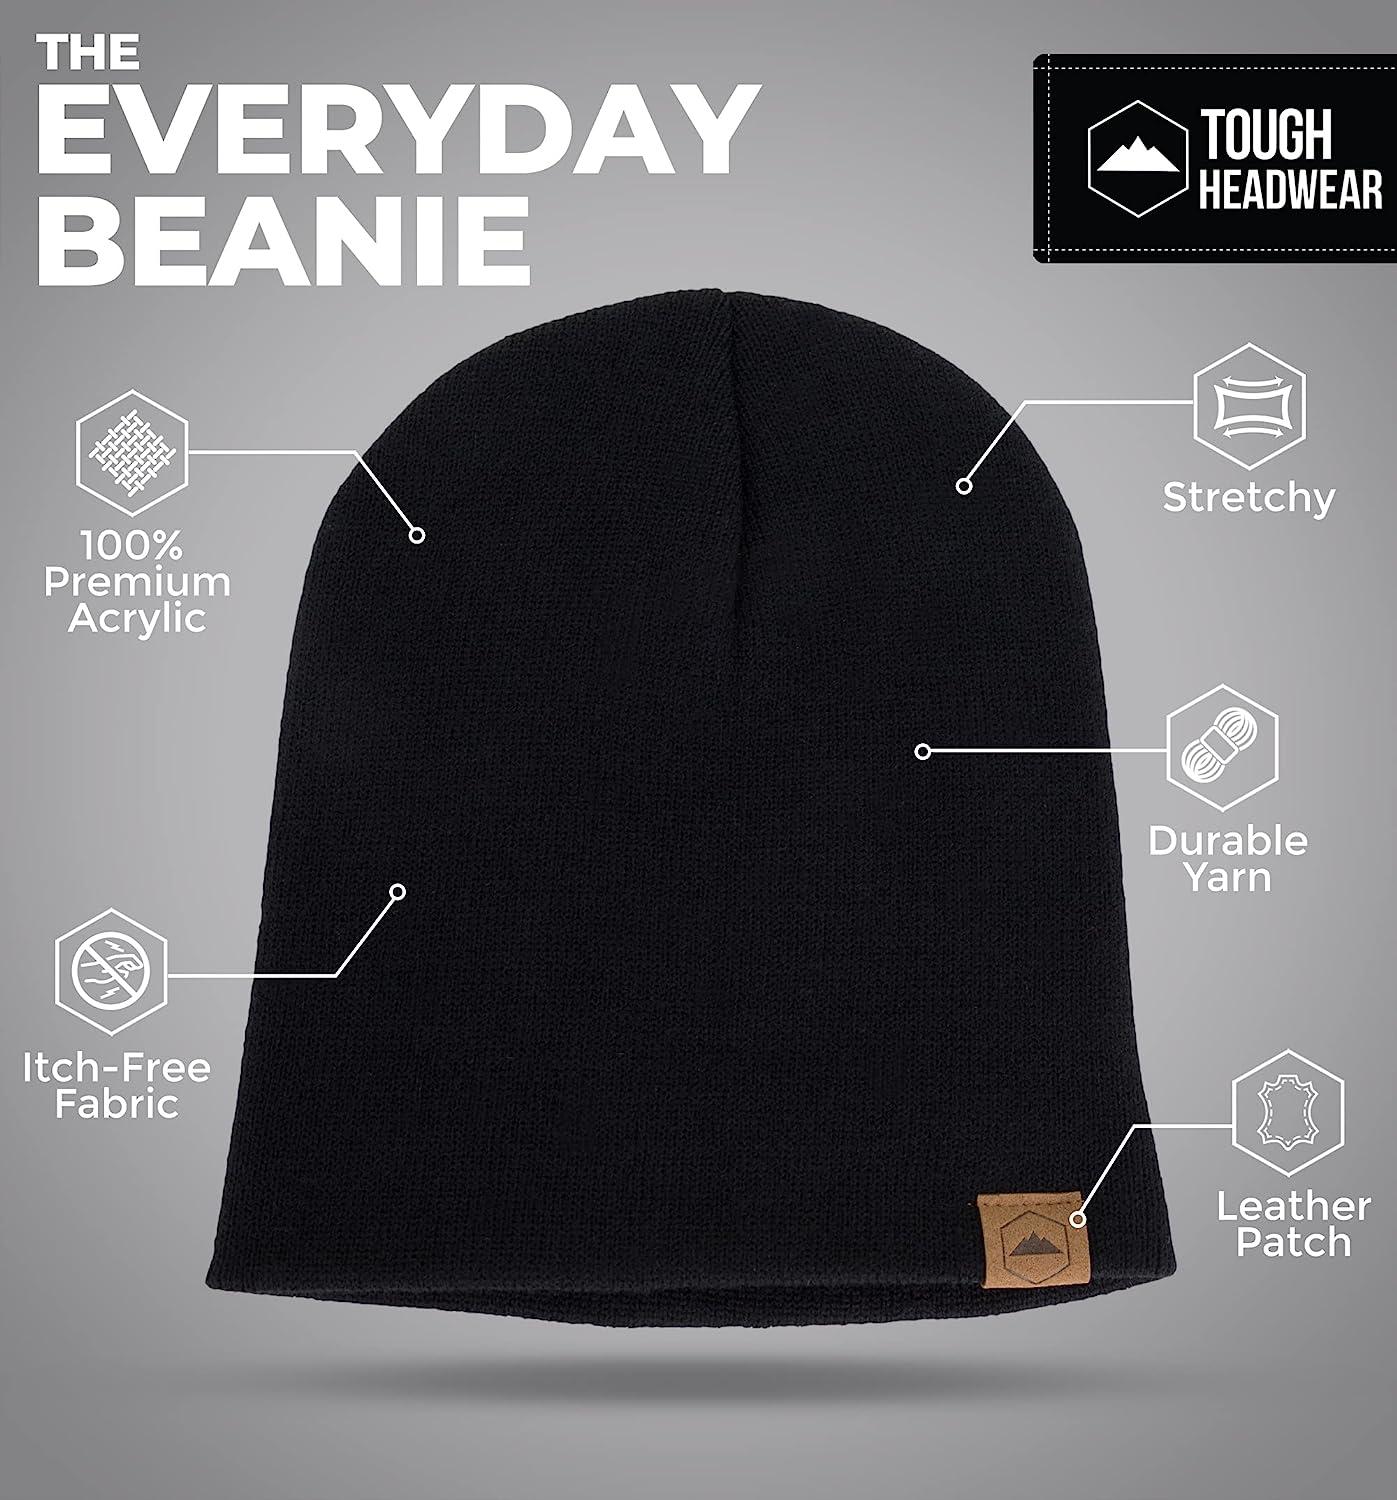 Tough Headwear Knit Beanie Winter for Cold Cap Toboggan Hat, - Black Ribbed One Stocking Skate Cap for Hat Men Size - Warm Weather Women and